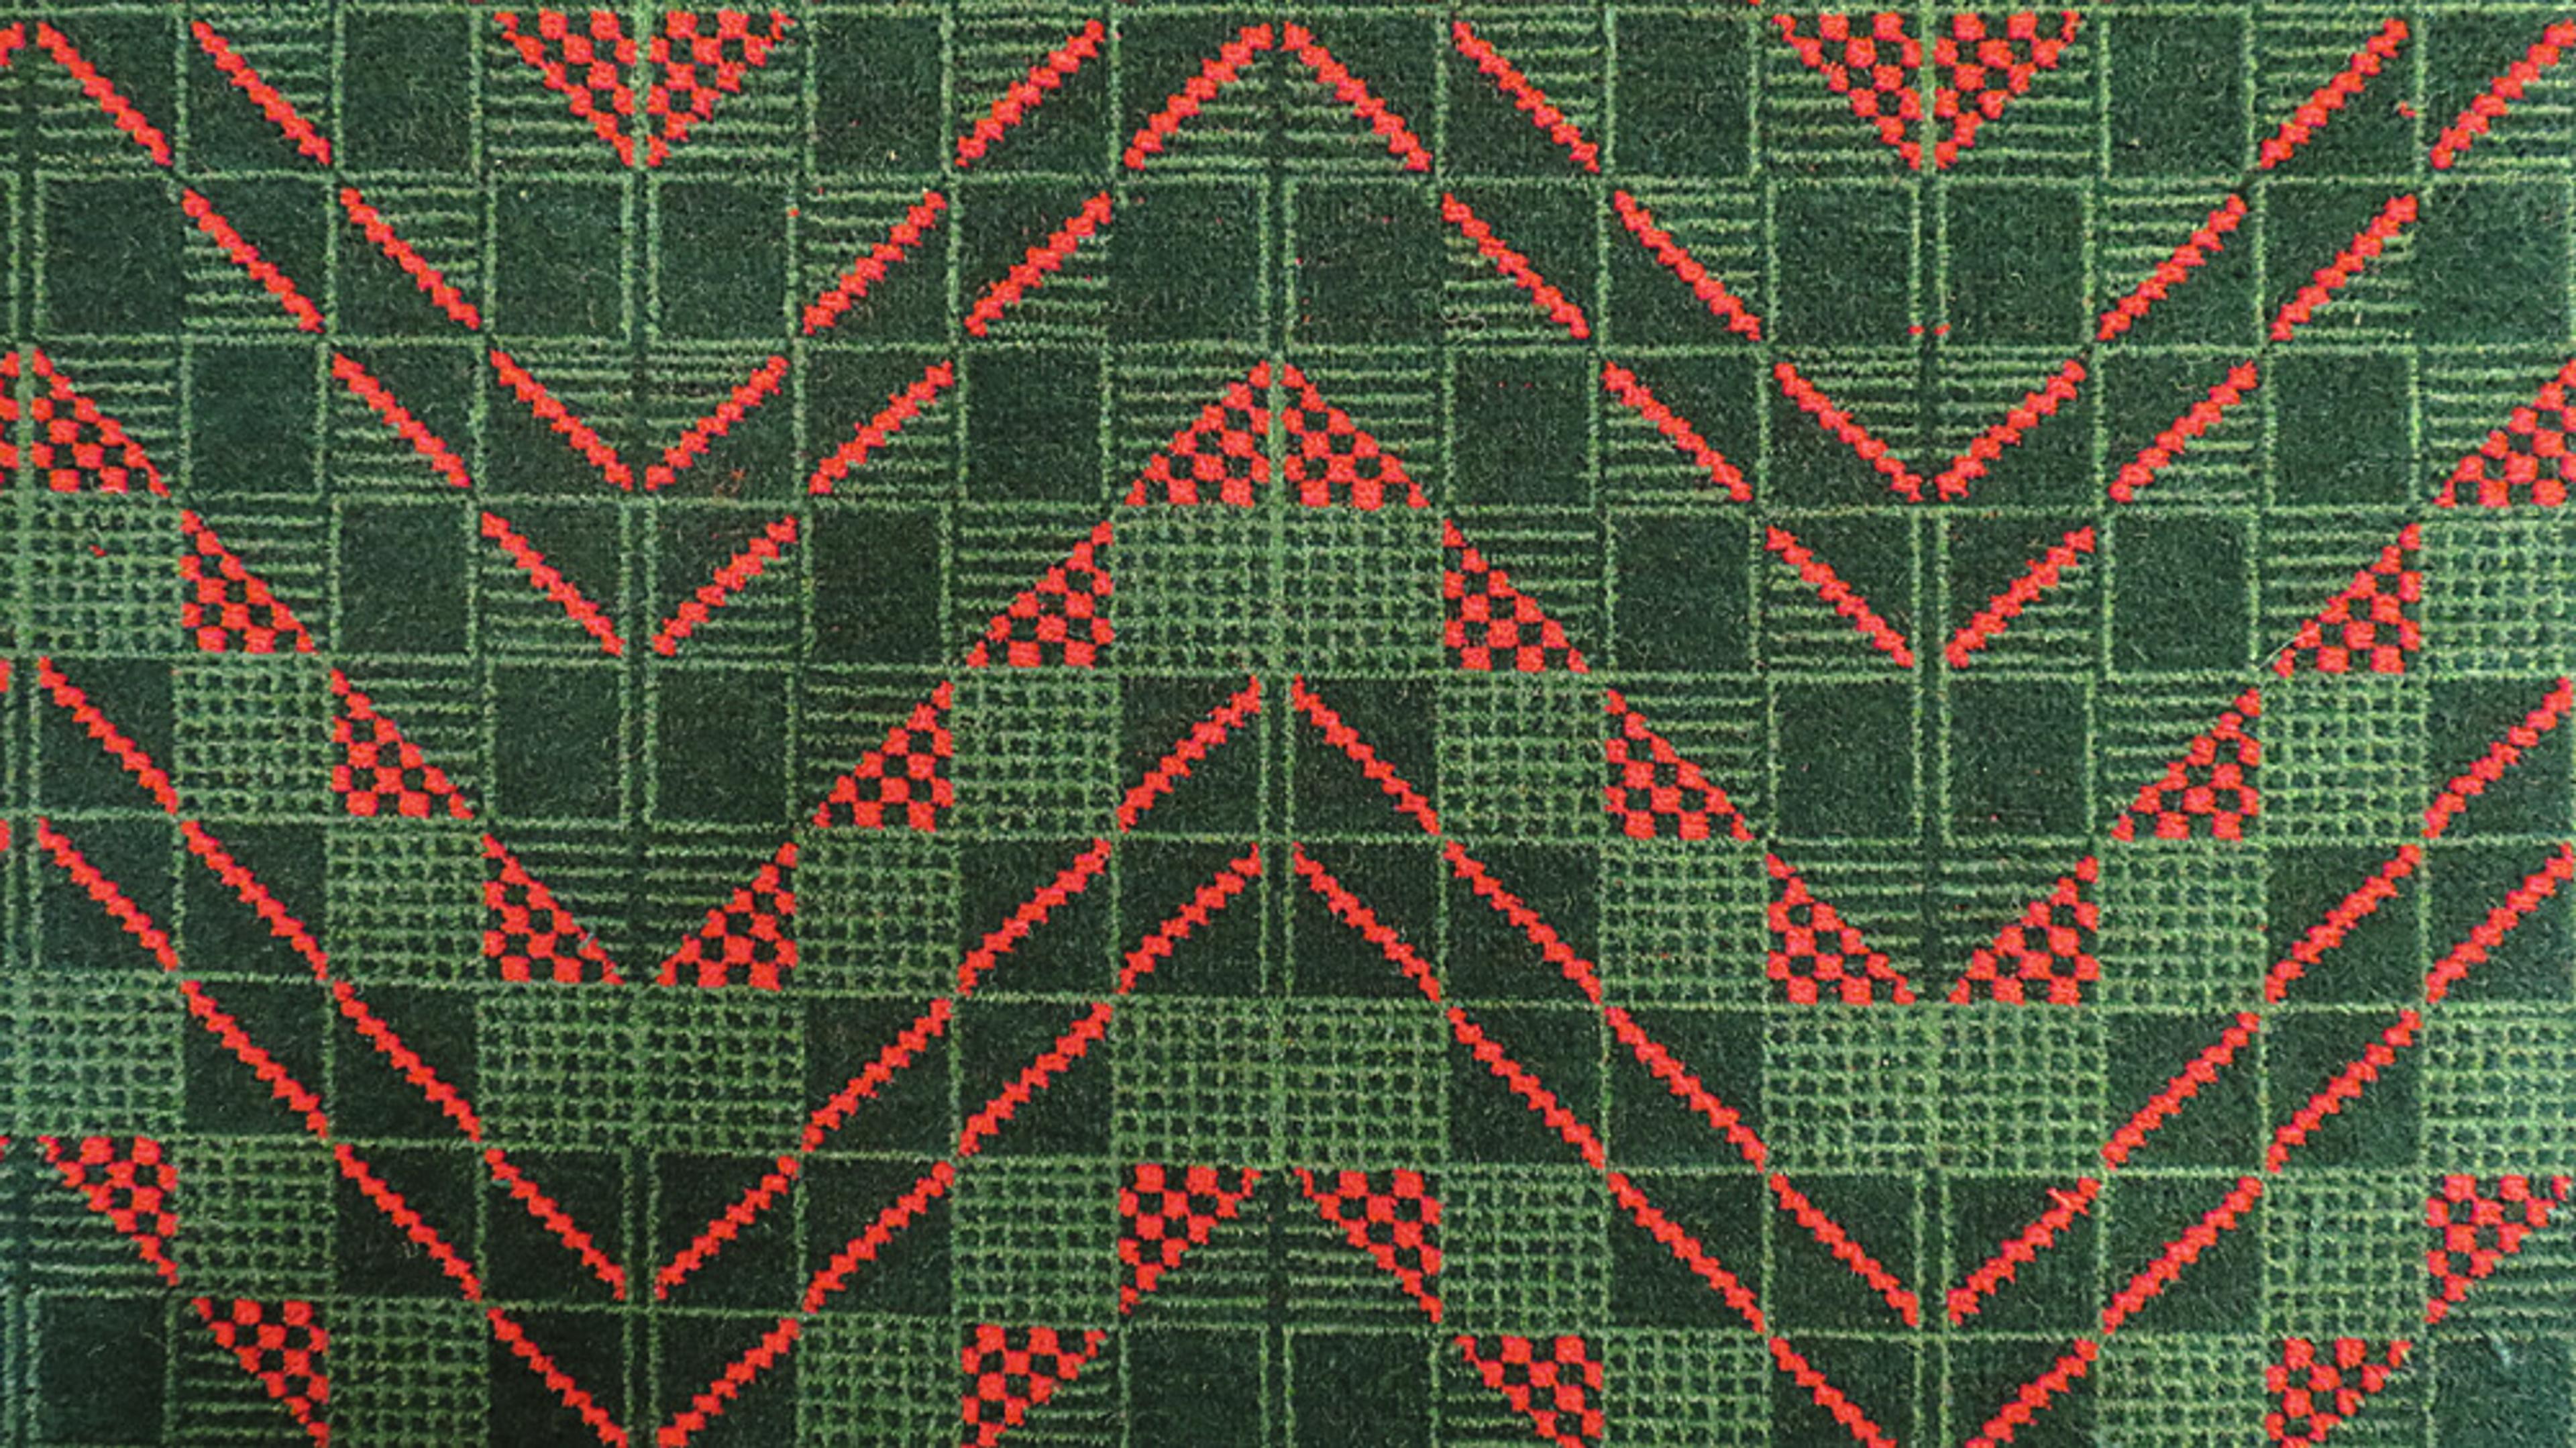 Red and green chevron pattern